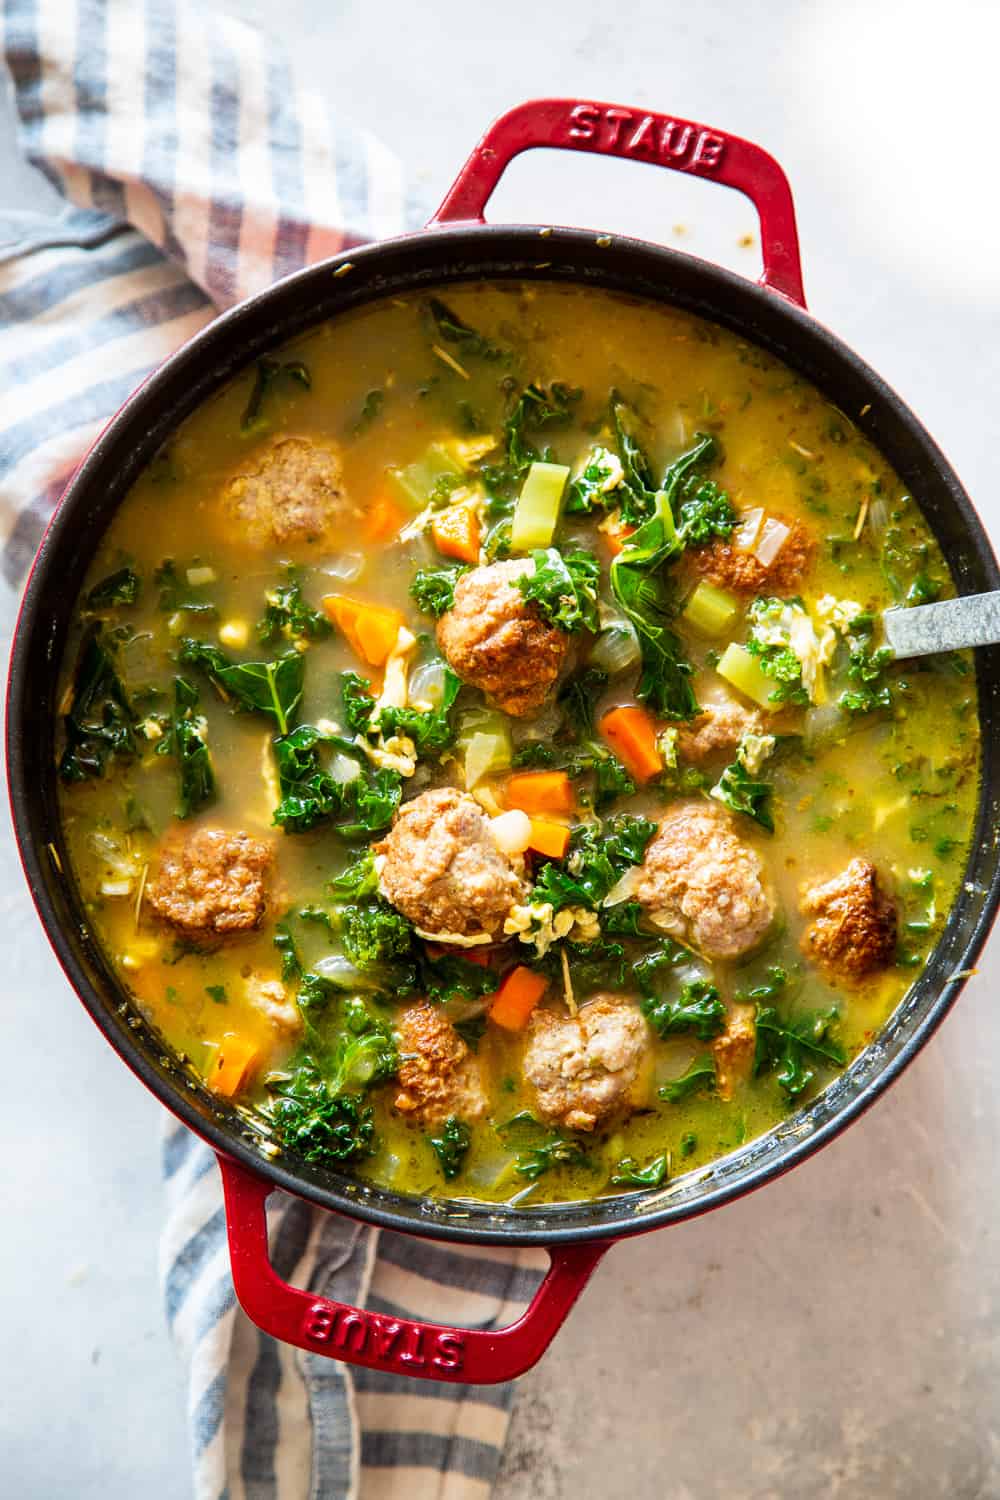 This Paleo Italian Wedding Soup is the perfect cozy comfort food! It’s easy to make, packed with the tastiest Italian sausage meatballs and plenty of veggies. It’s grain free, Whole30 friendly and keto. #paleo #whole30 #keto #cleaneating #soup